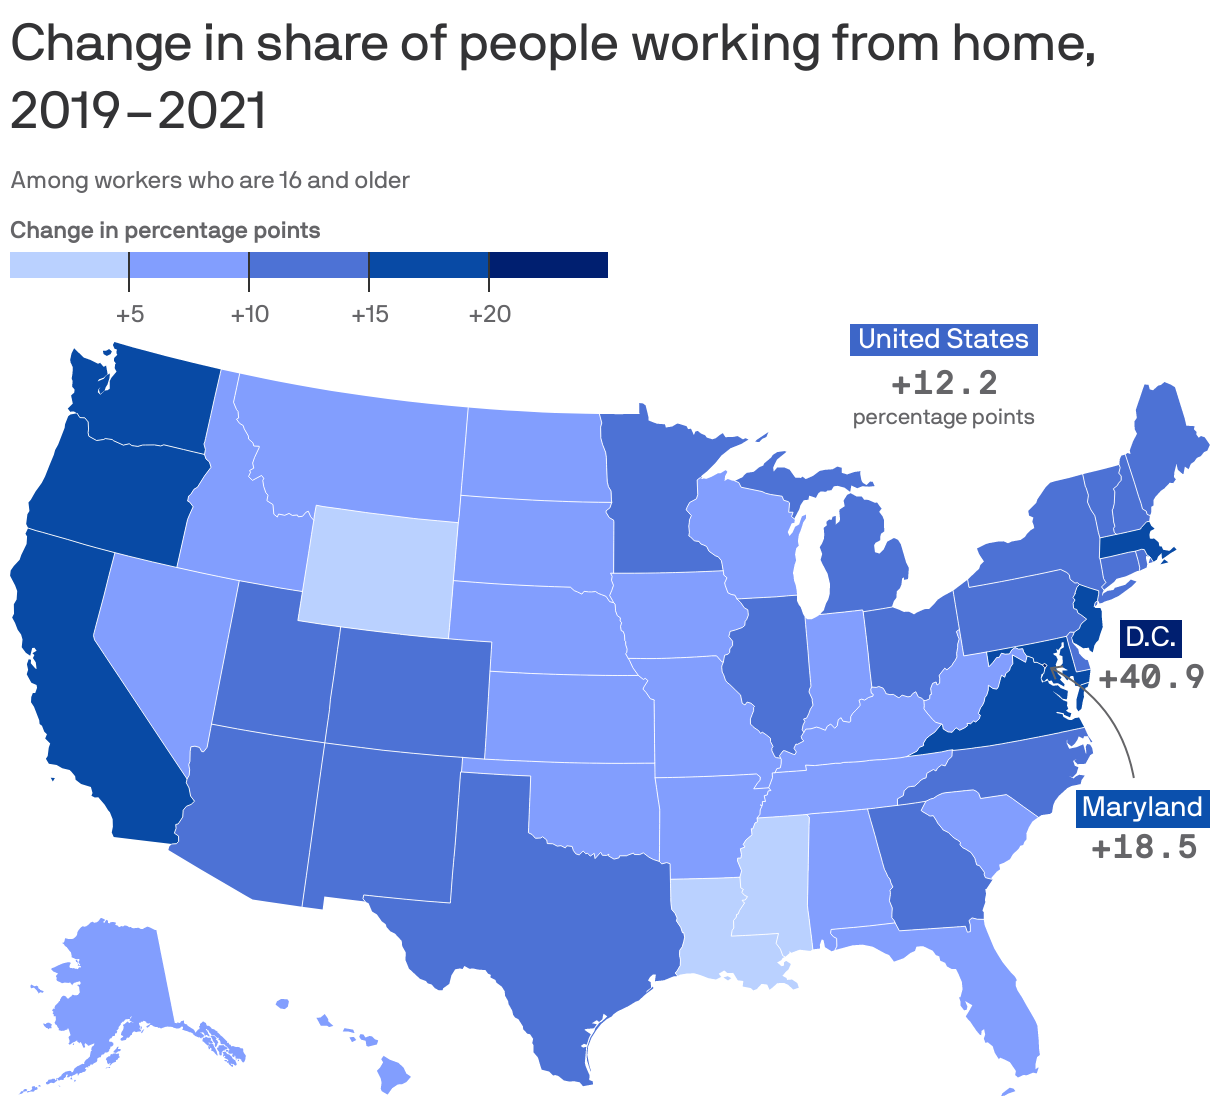 Change in share of people working from home from 2019 to 2021